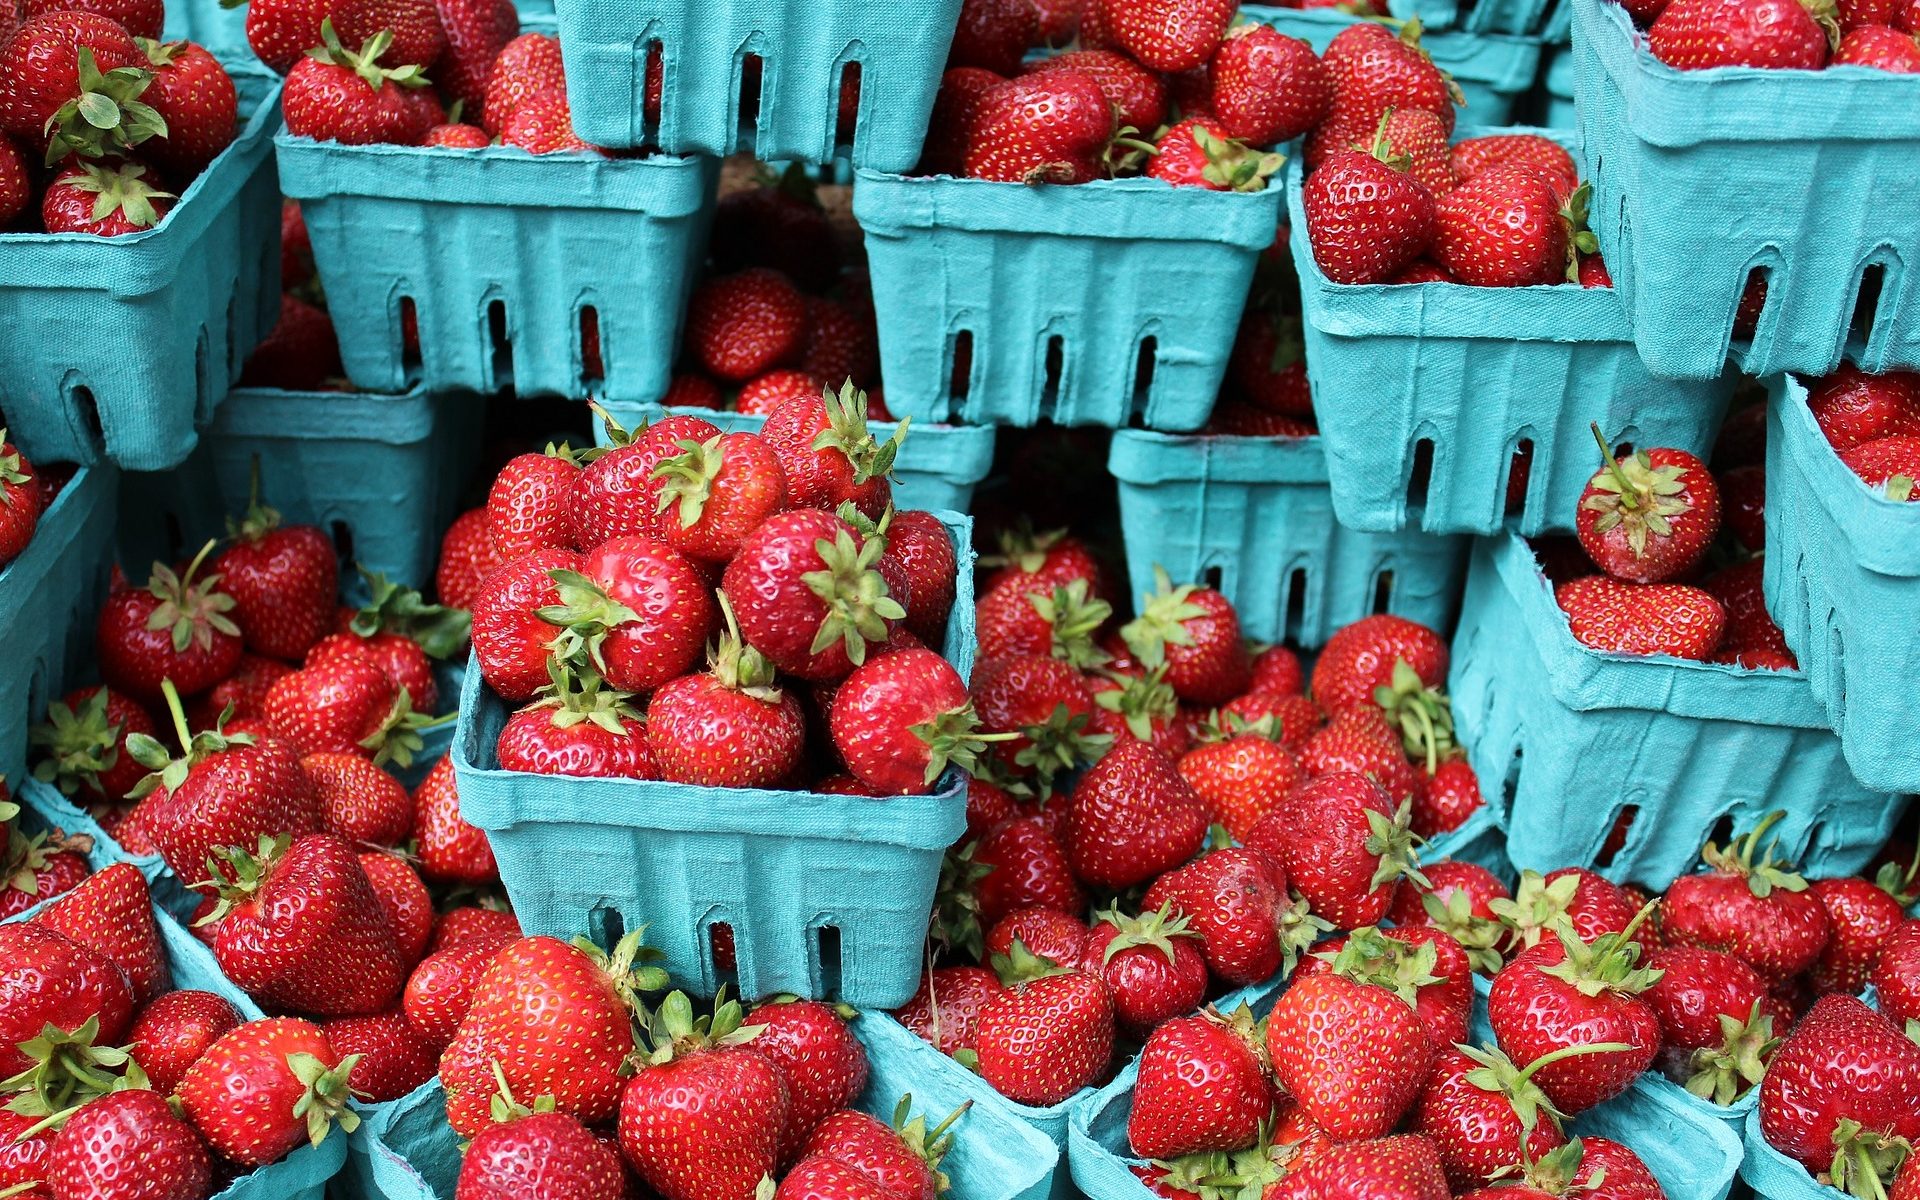 Picture of strawberries in pint containers to sell.